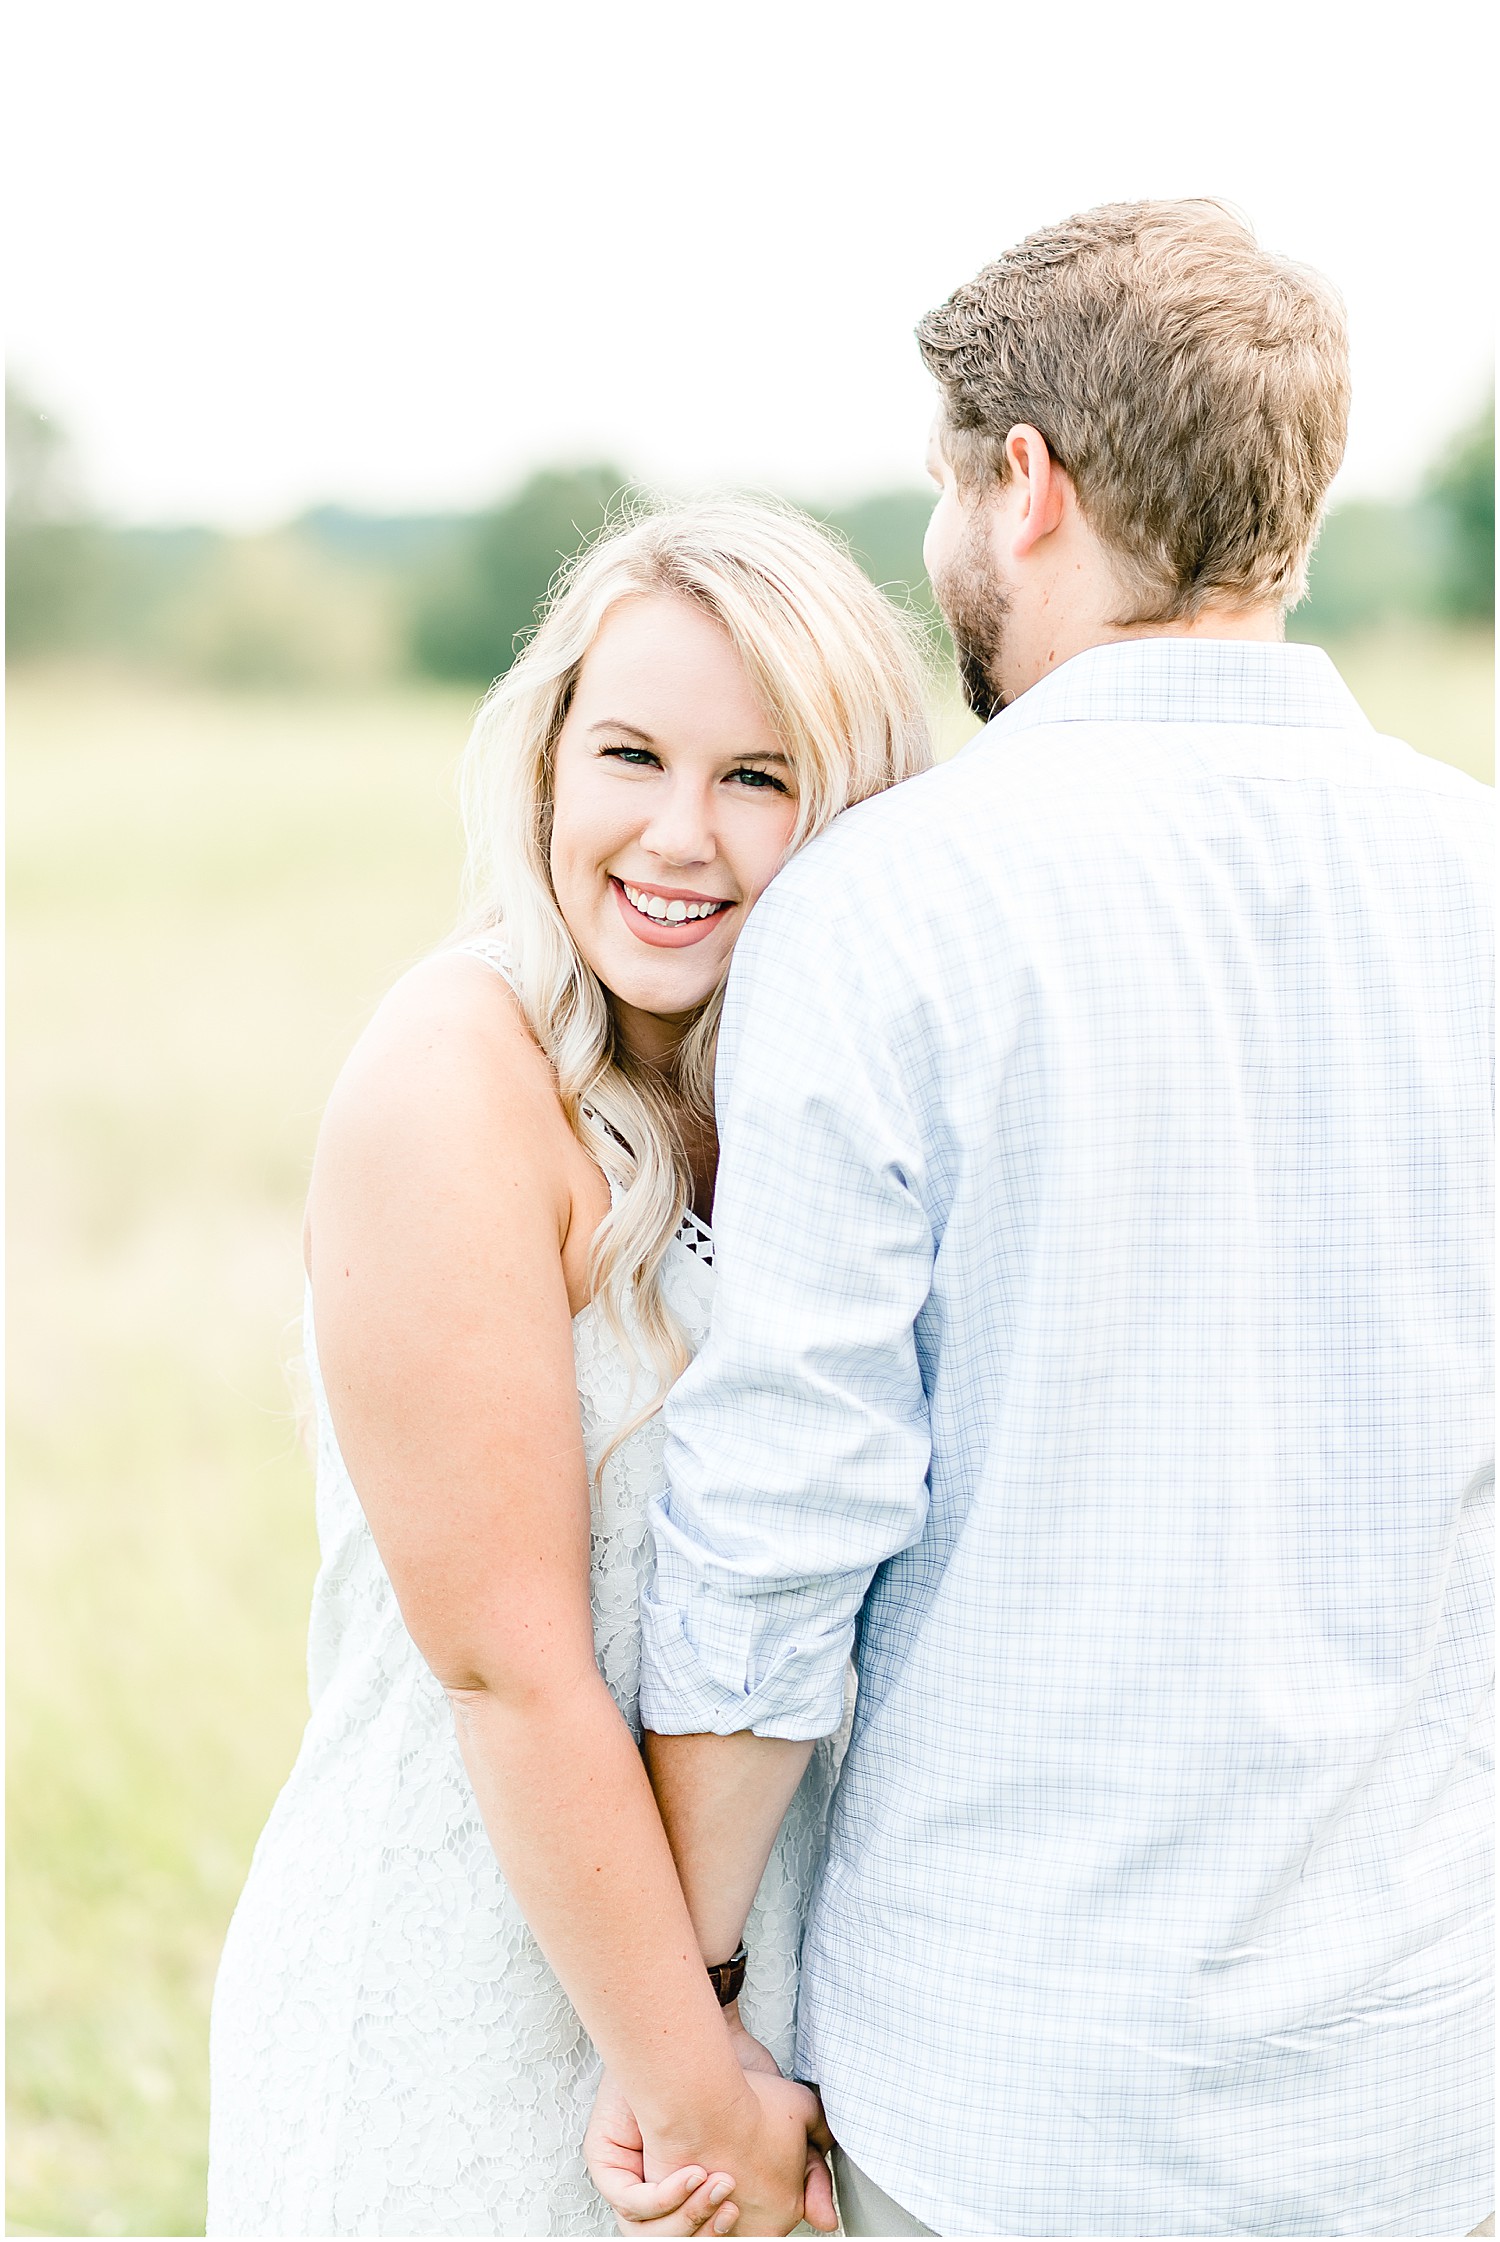 Cooper's ridge engagement session couple standing in field of grass cuddling